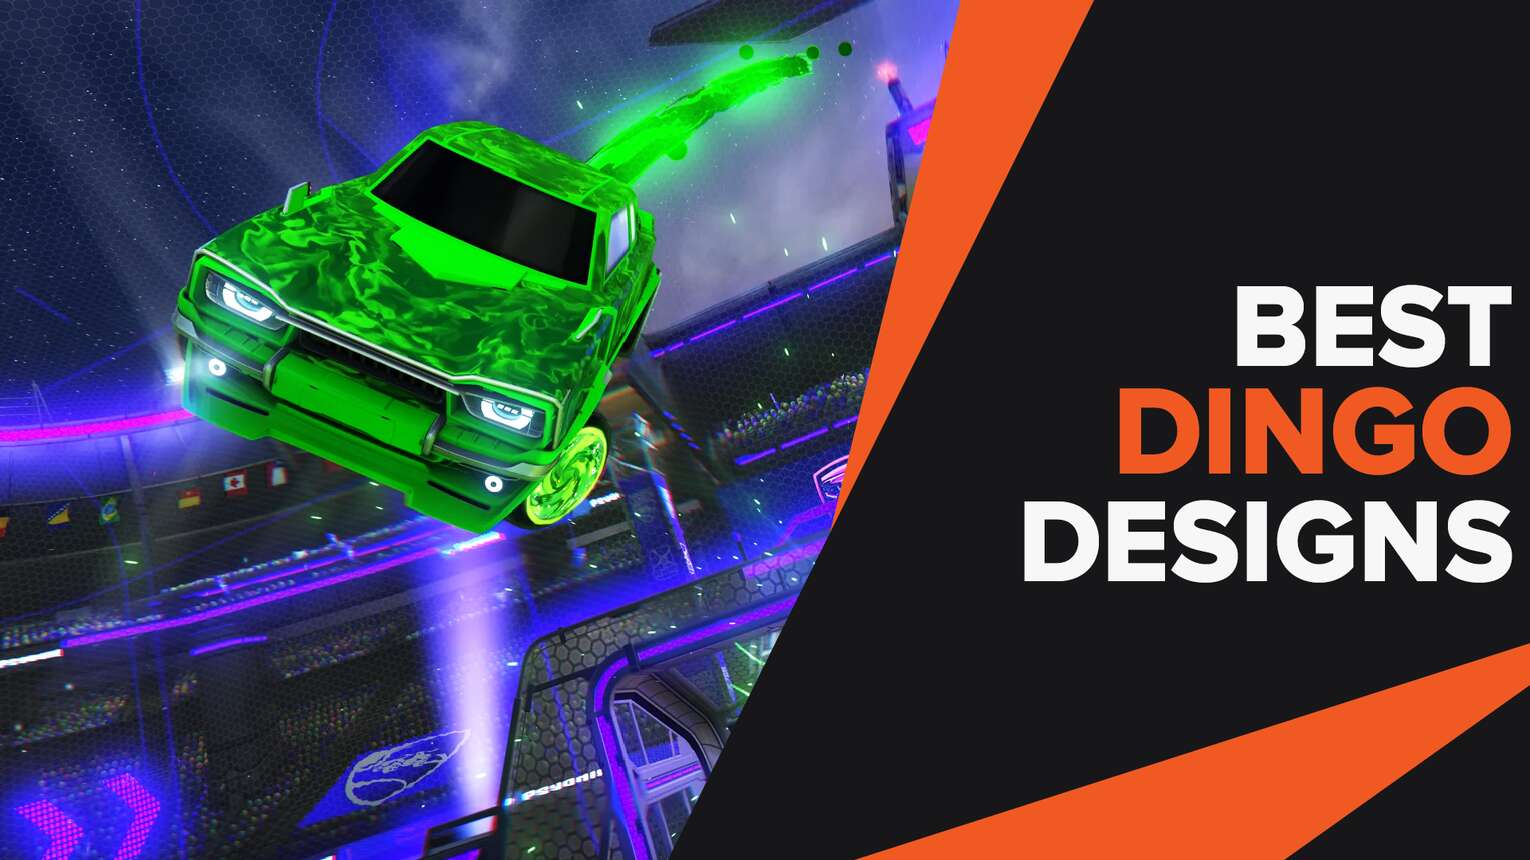 Best Dingo Designs That Turn Into a Fashionista in Rocket League